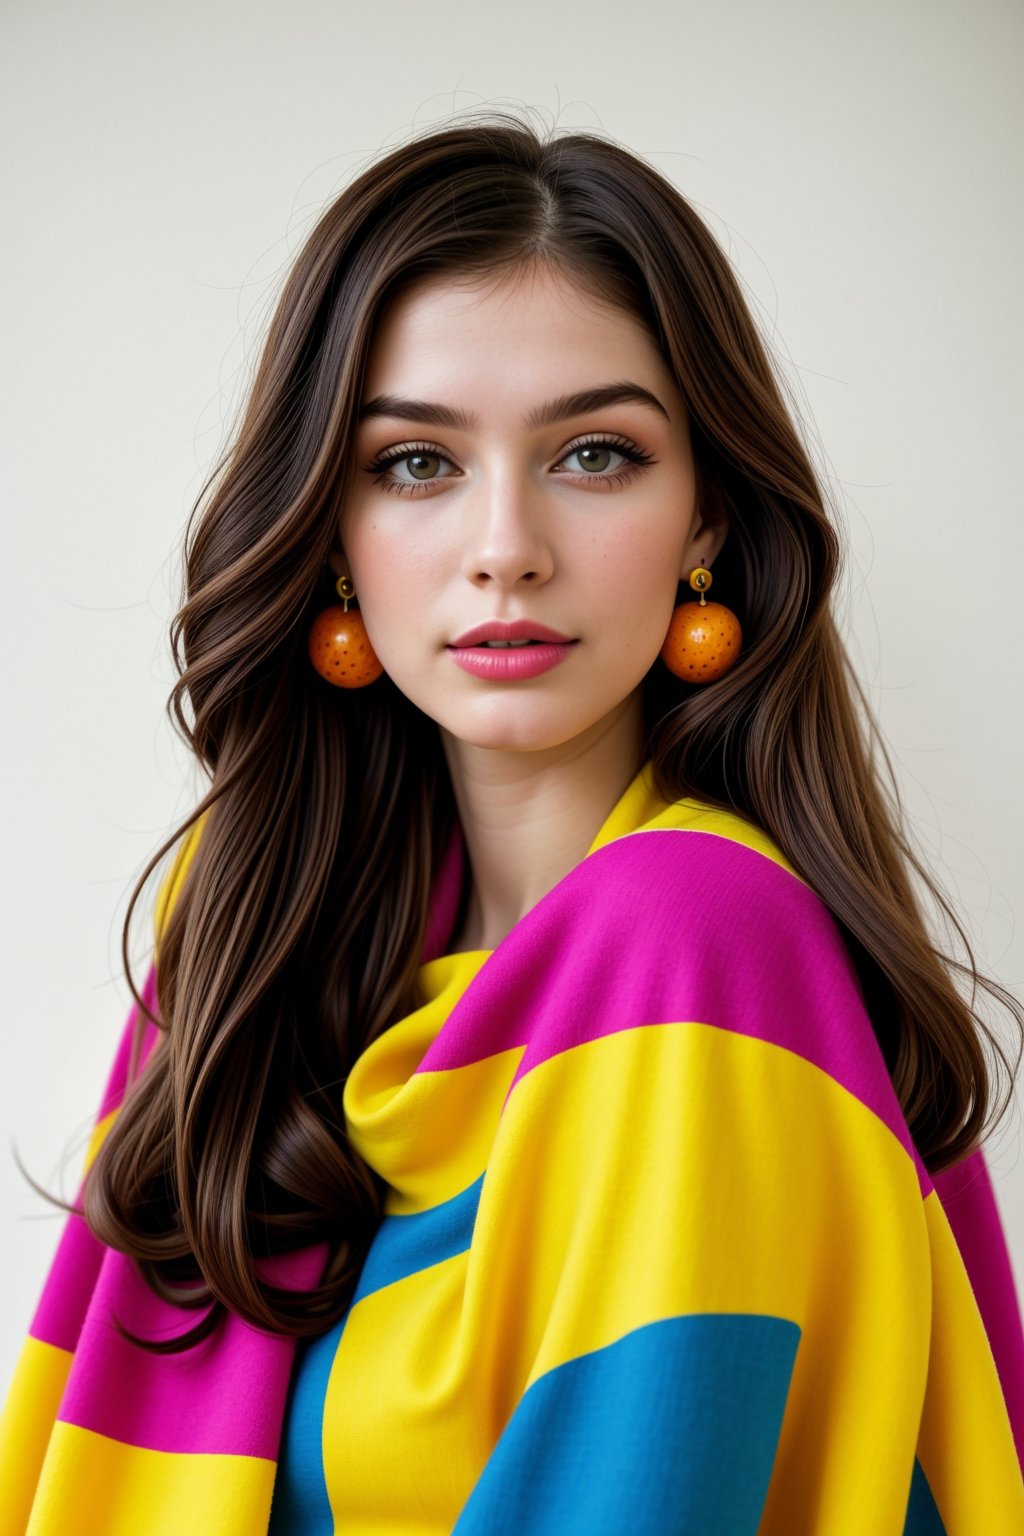 A pale young woman with long colorful hair and colorful make up, a colorful striped scarf, and playful fruit earrings, looking directly at the camera, a portrait in the style of a 1960s fashion magazine, with bright colors, sharp focus, and a soft, natural light.,<lora:659111690174031528:1.0>